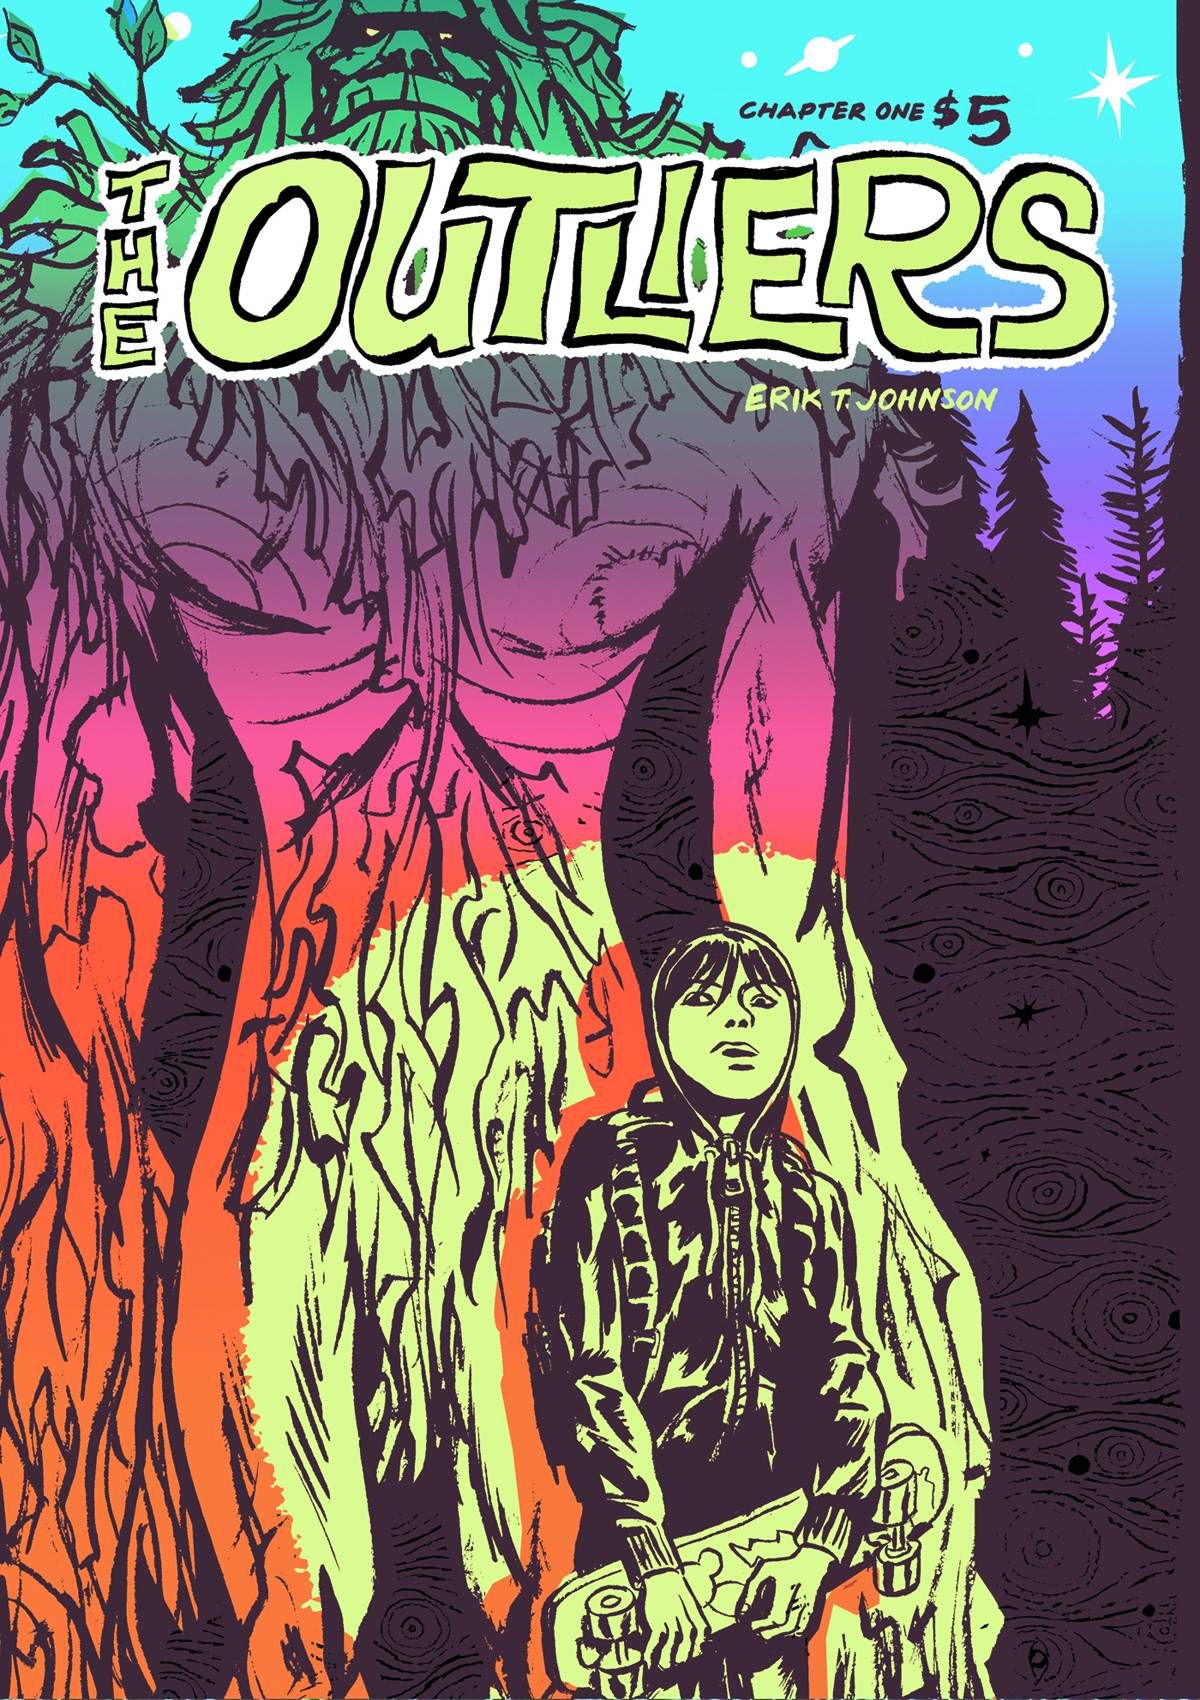 Outliers, The #1 Comic